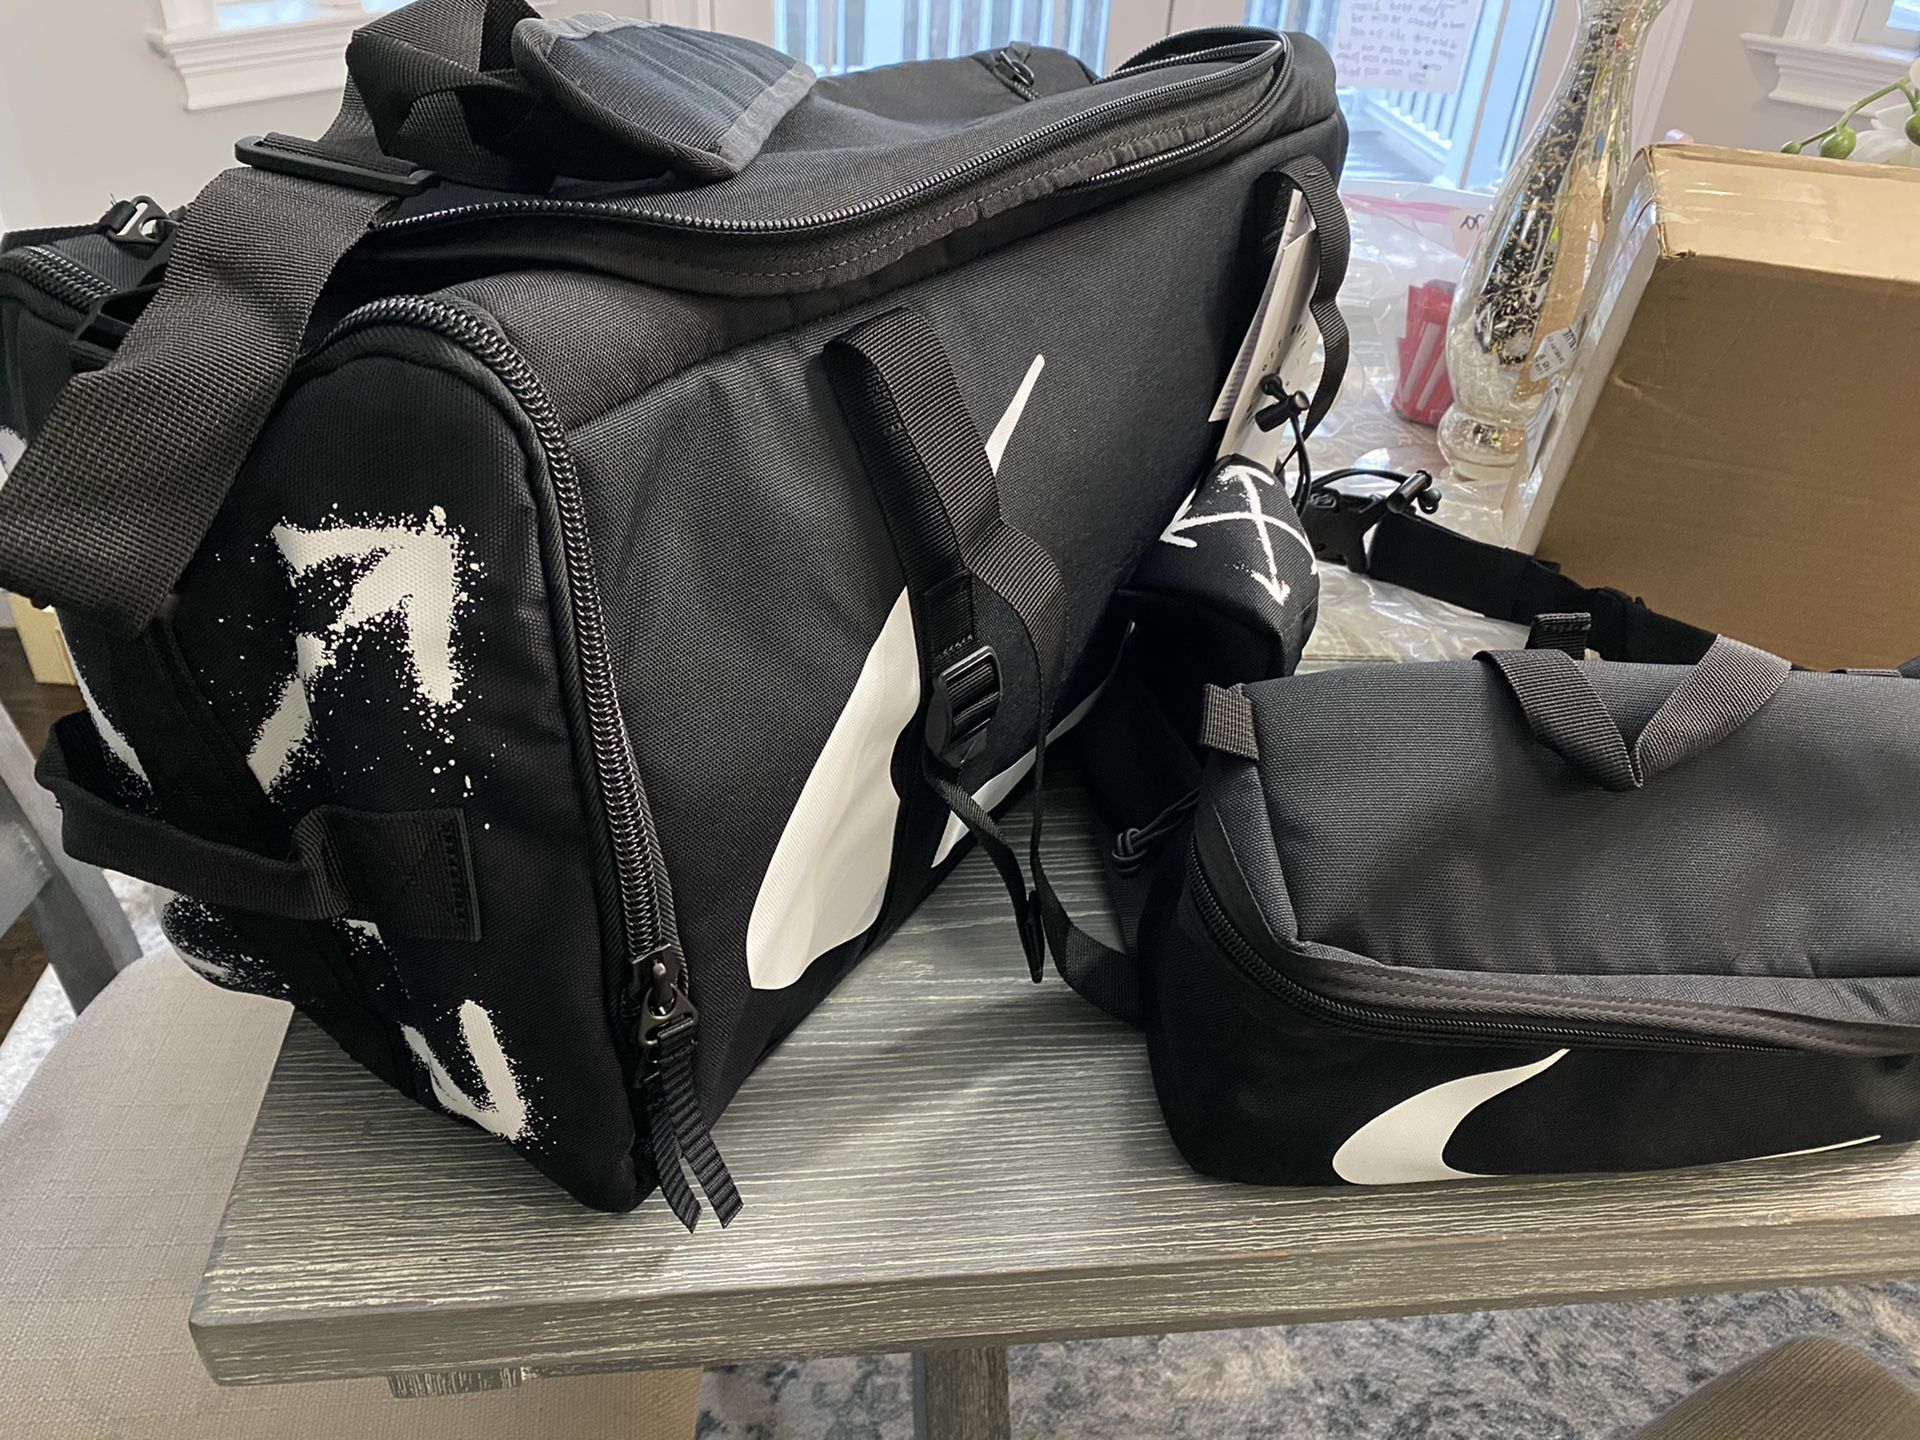 Nike off white duffle back and waist bag new $325 for Sale in New